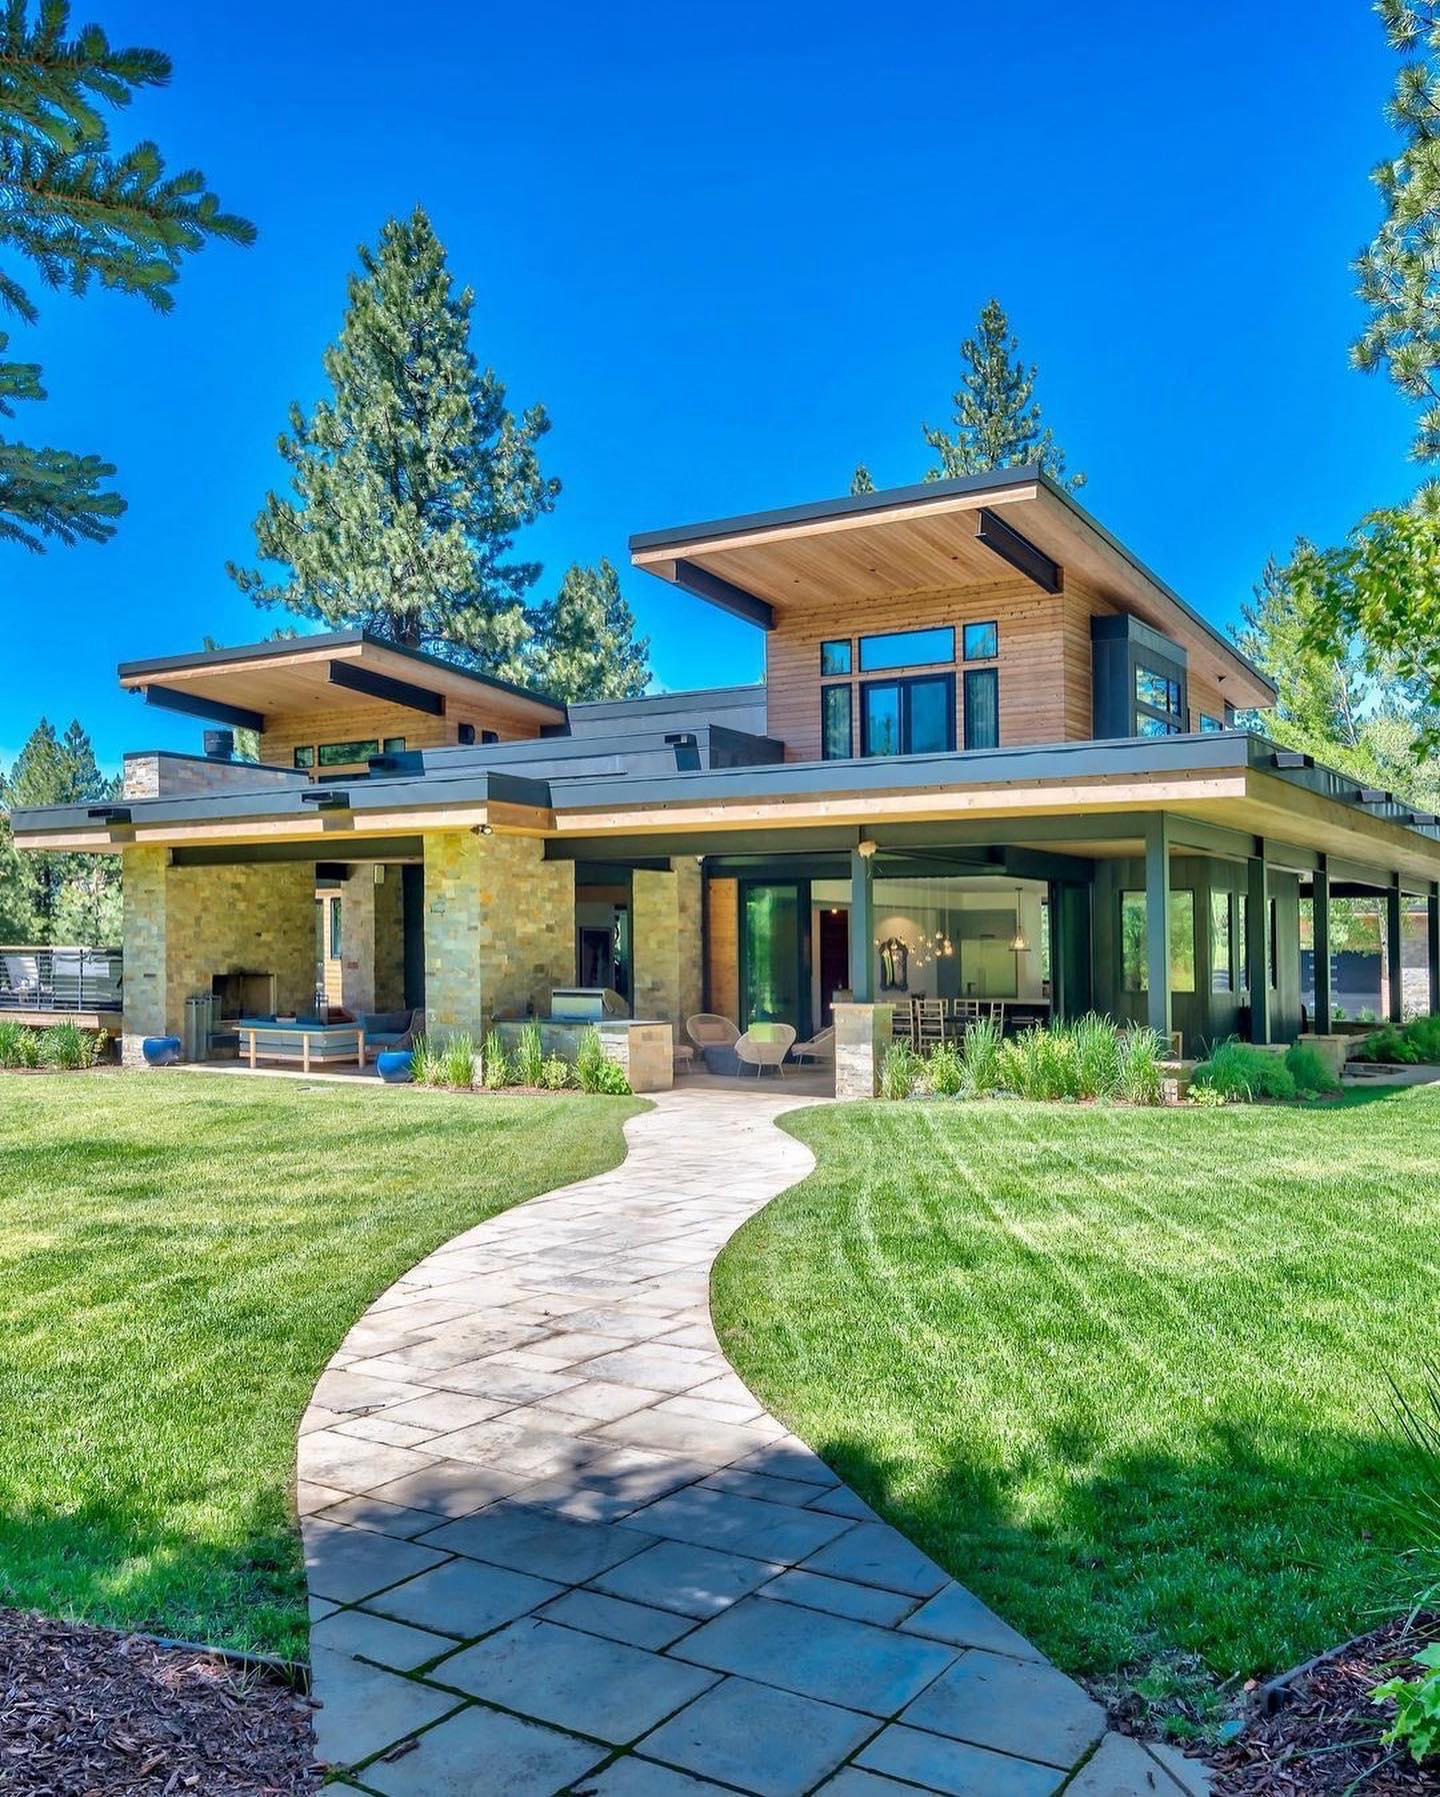 Millionaire Homes - A contemporary masterpiece, located on 5 acres of beautiful #Truckee, California